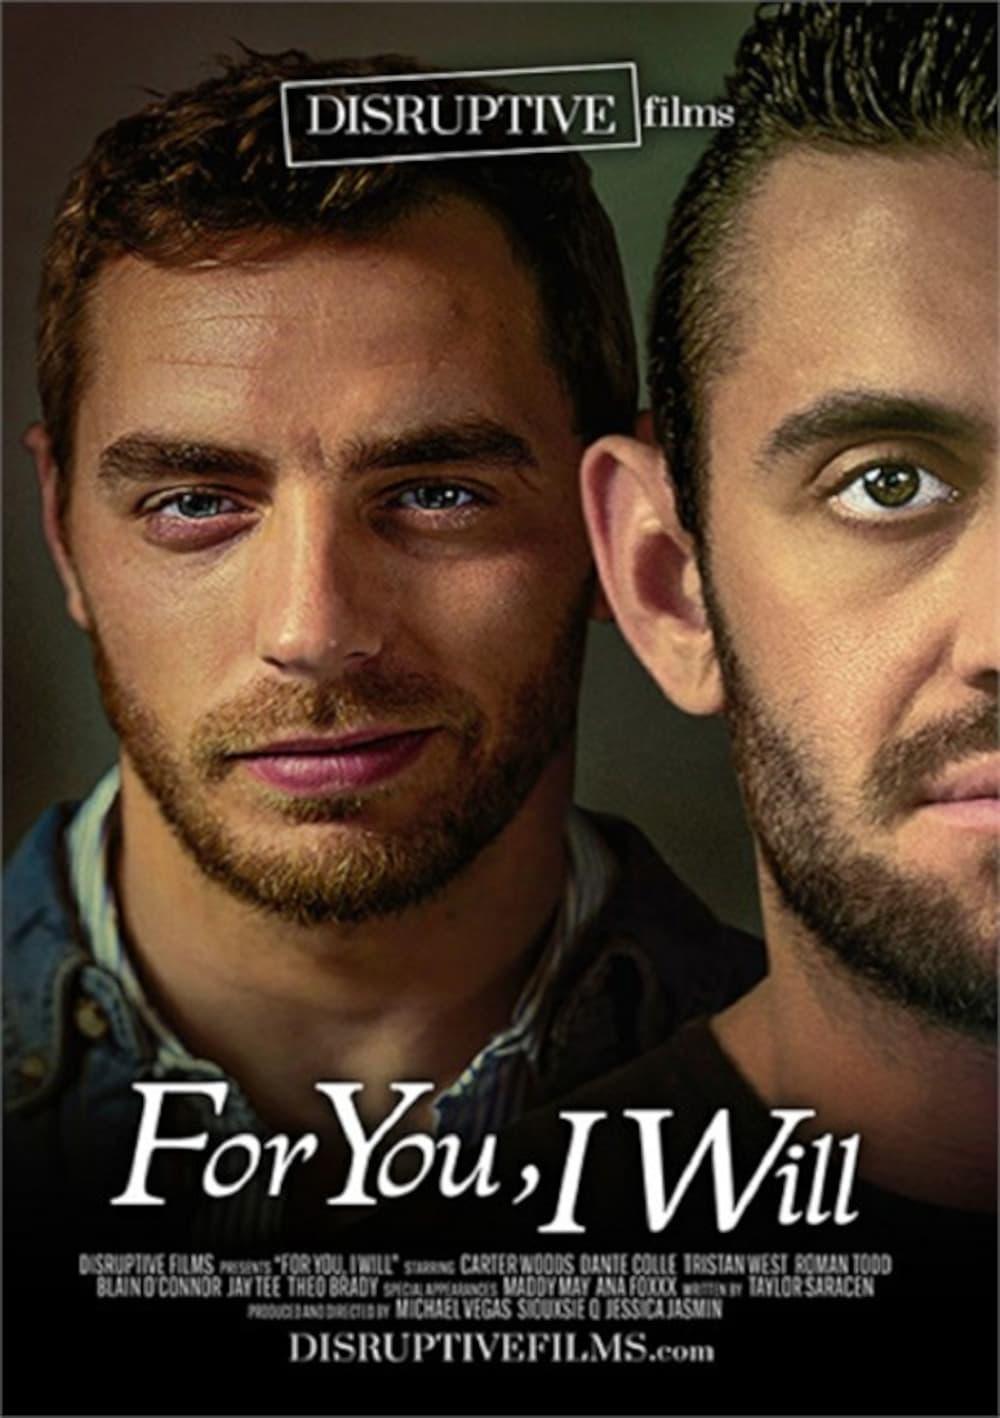 For You, I Will poster